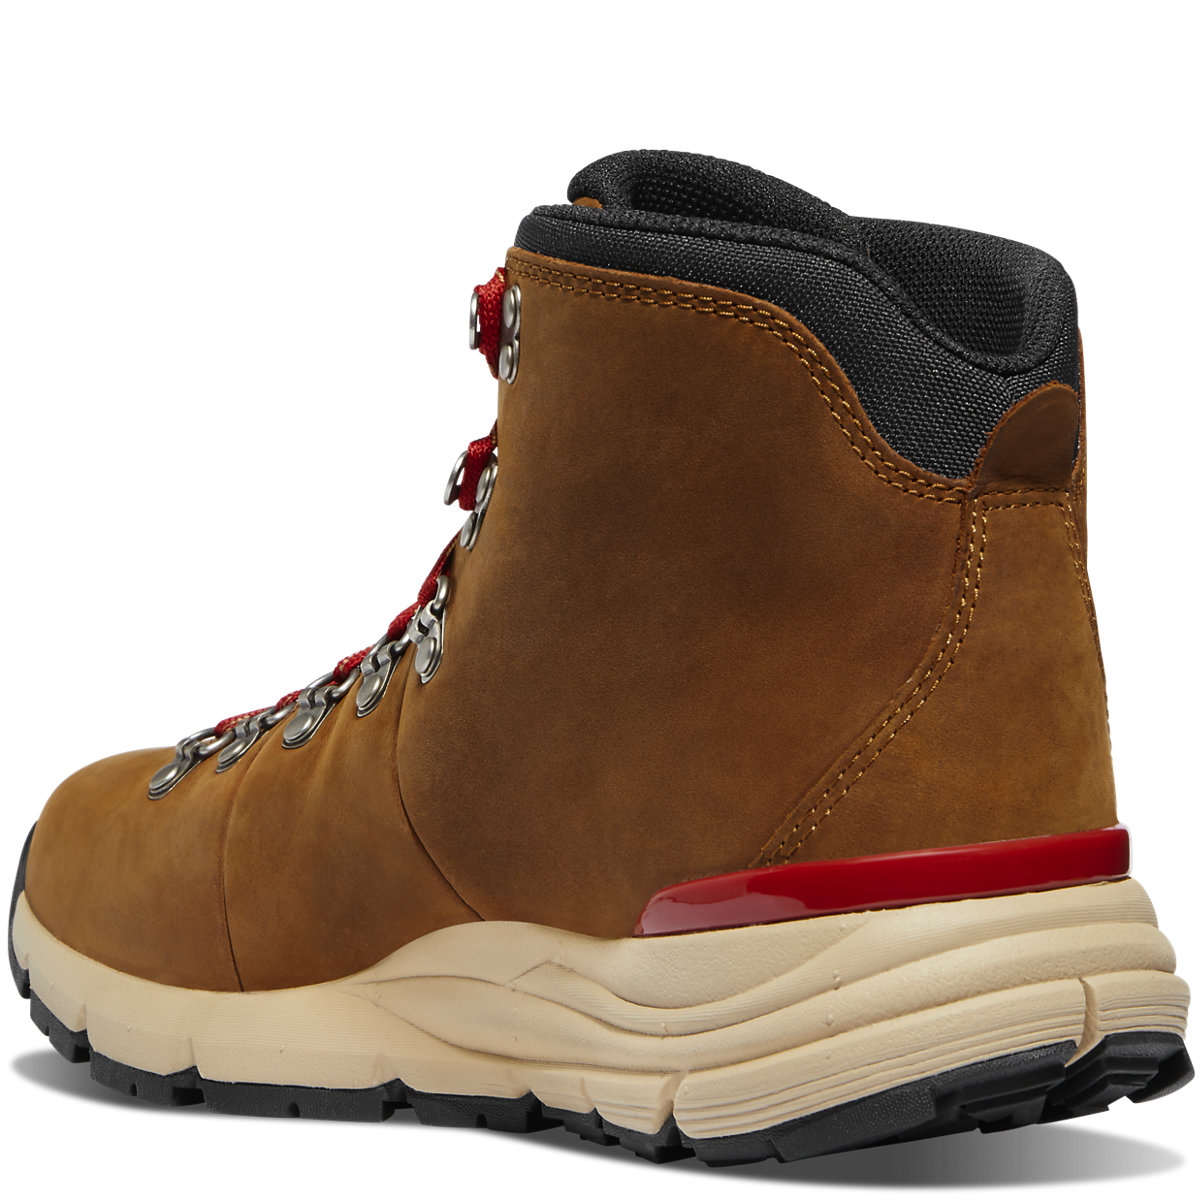 Mountain 600 Leaf 4.5" Grizzly Brown/Rhodo Red GTX